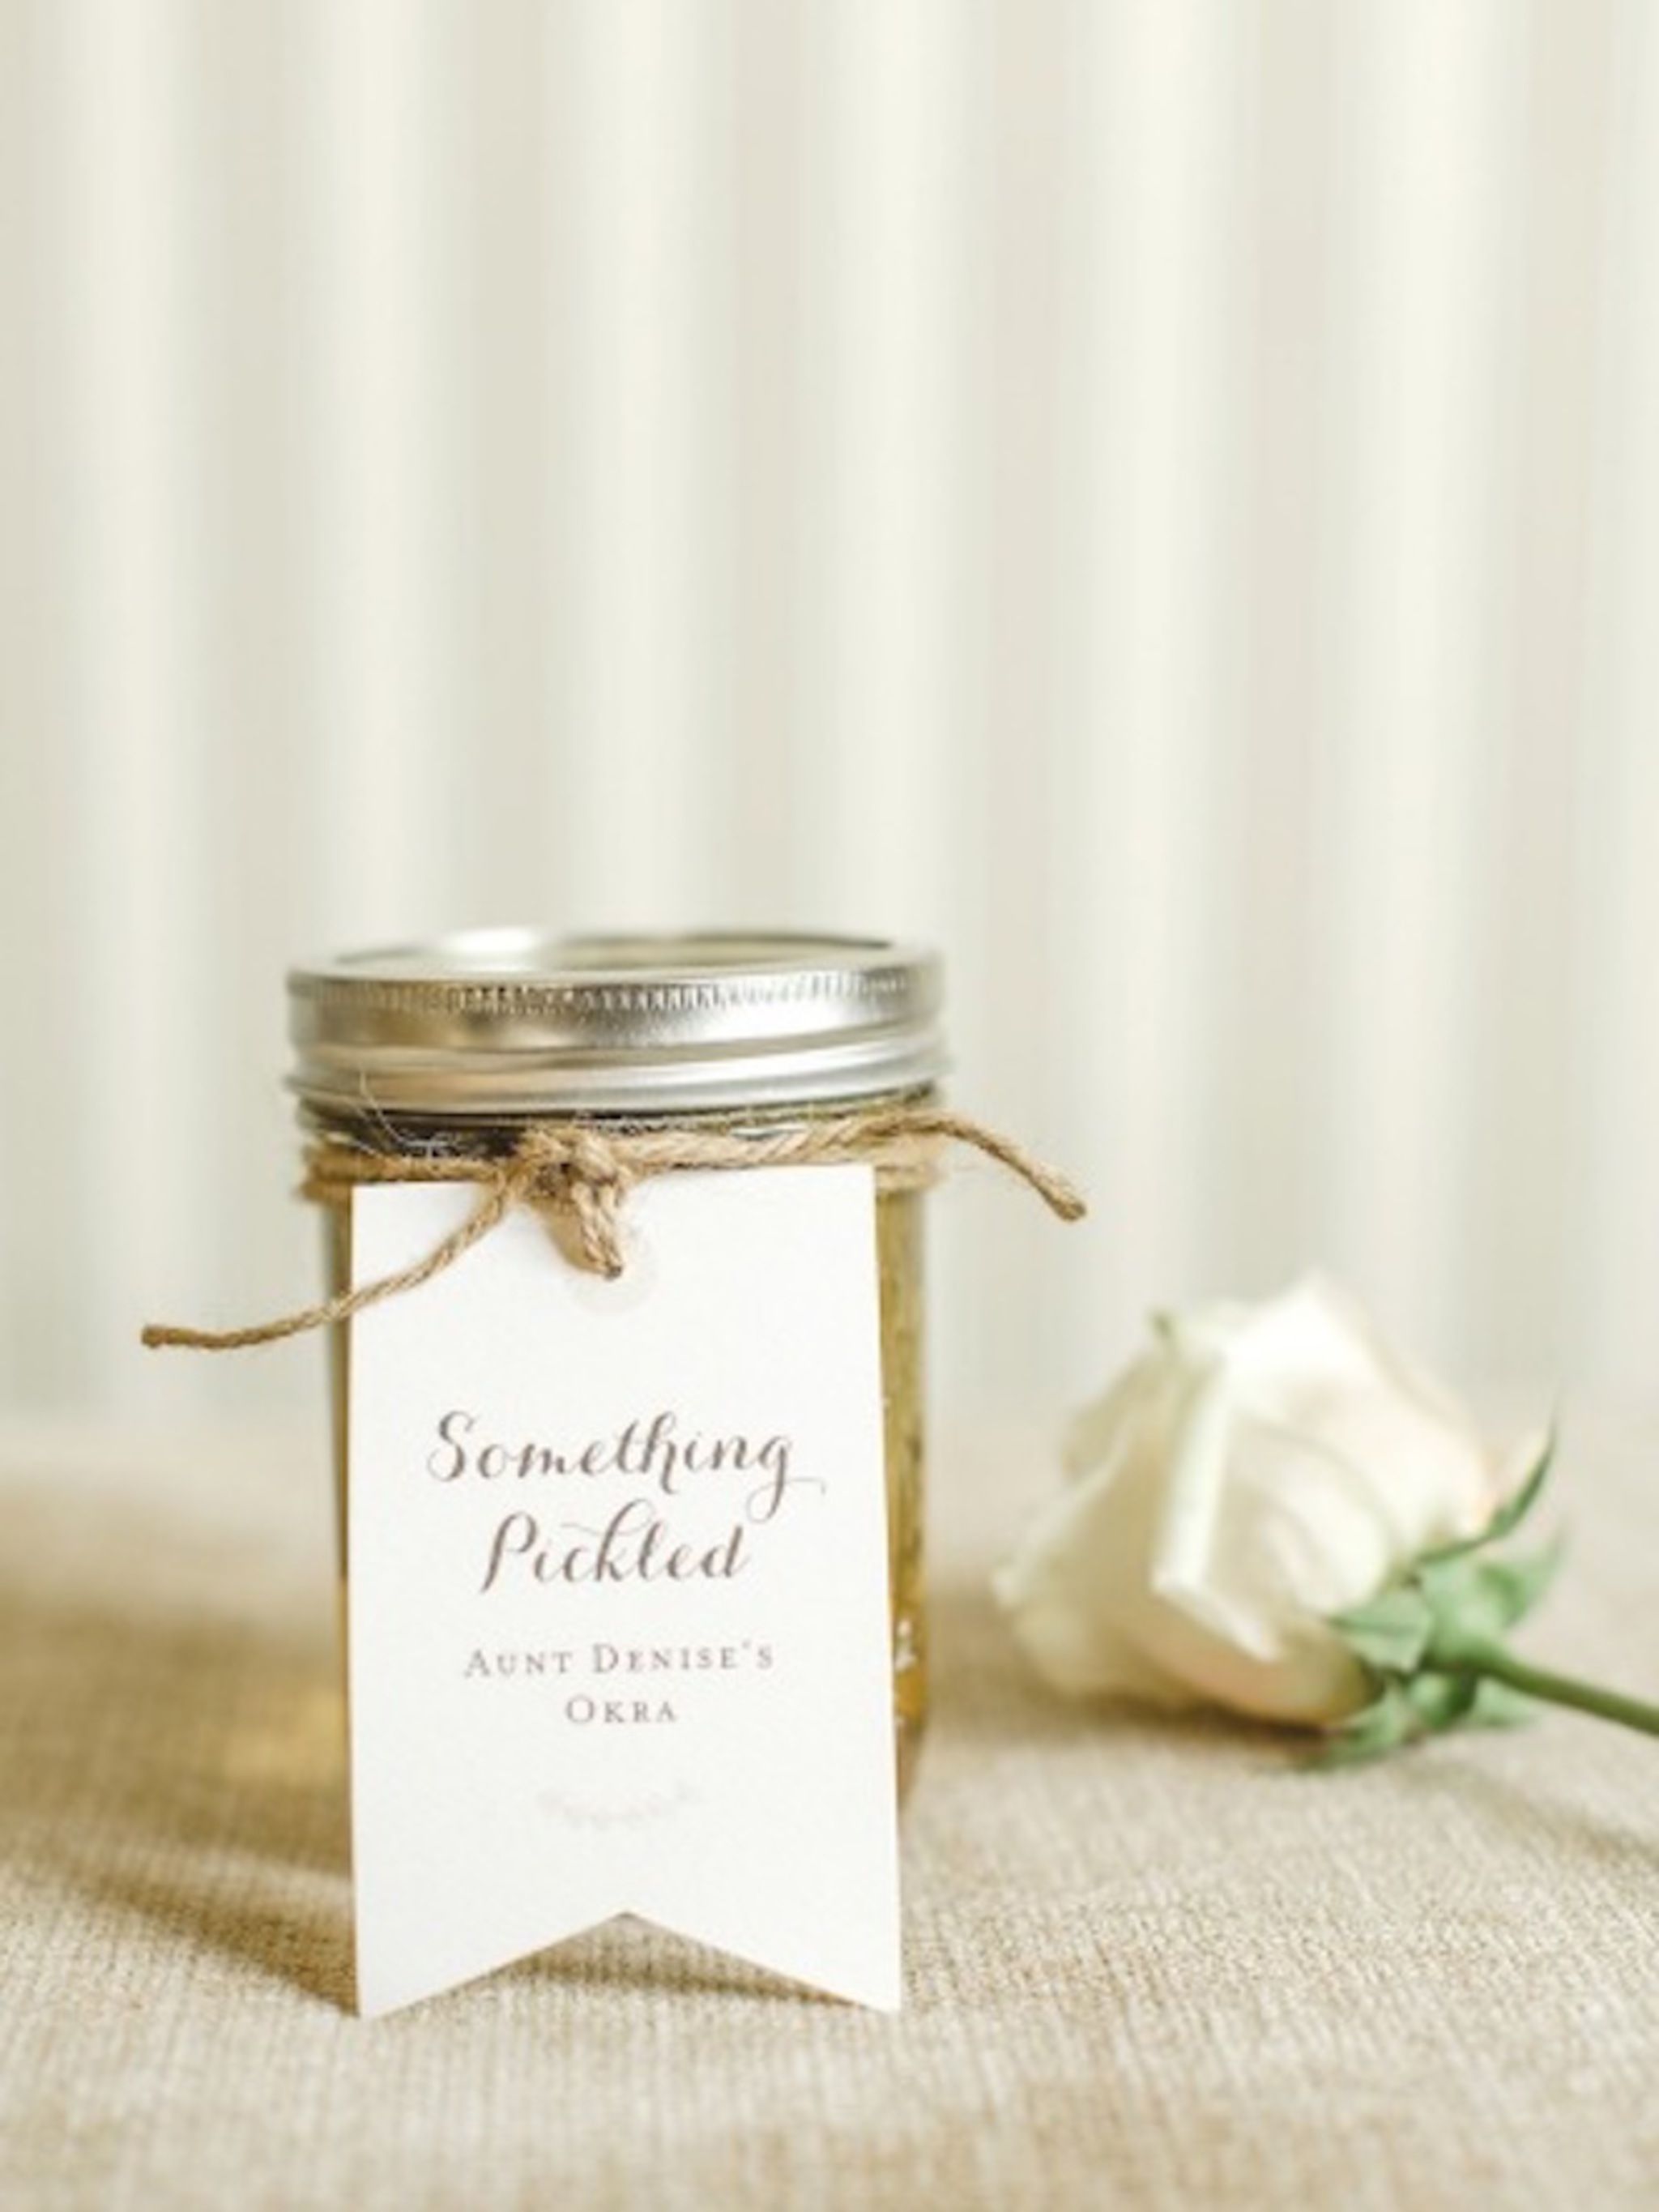 12 Original Wedding Favours To Delight Your Guests With